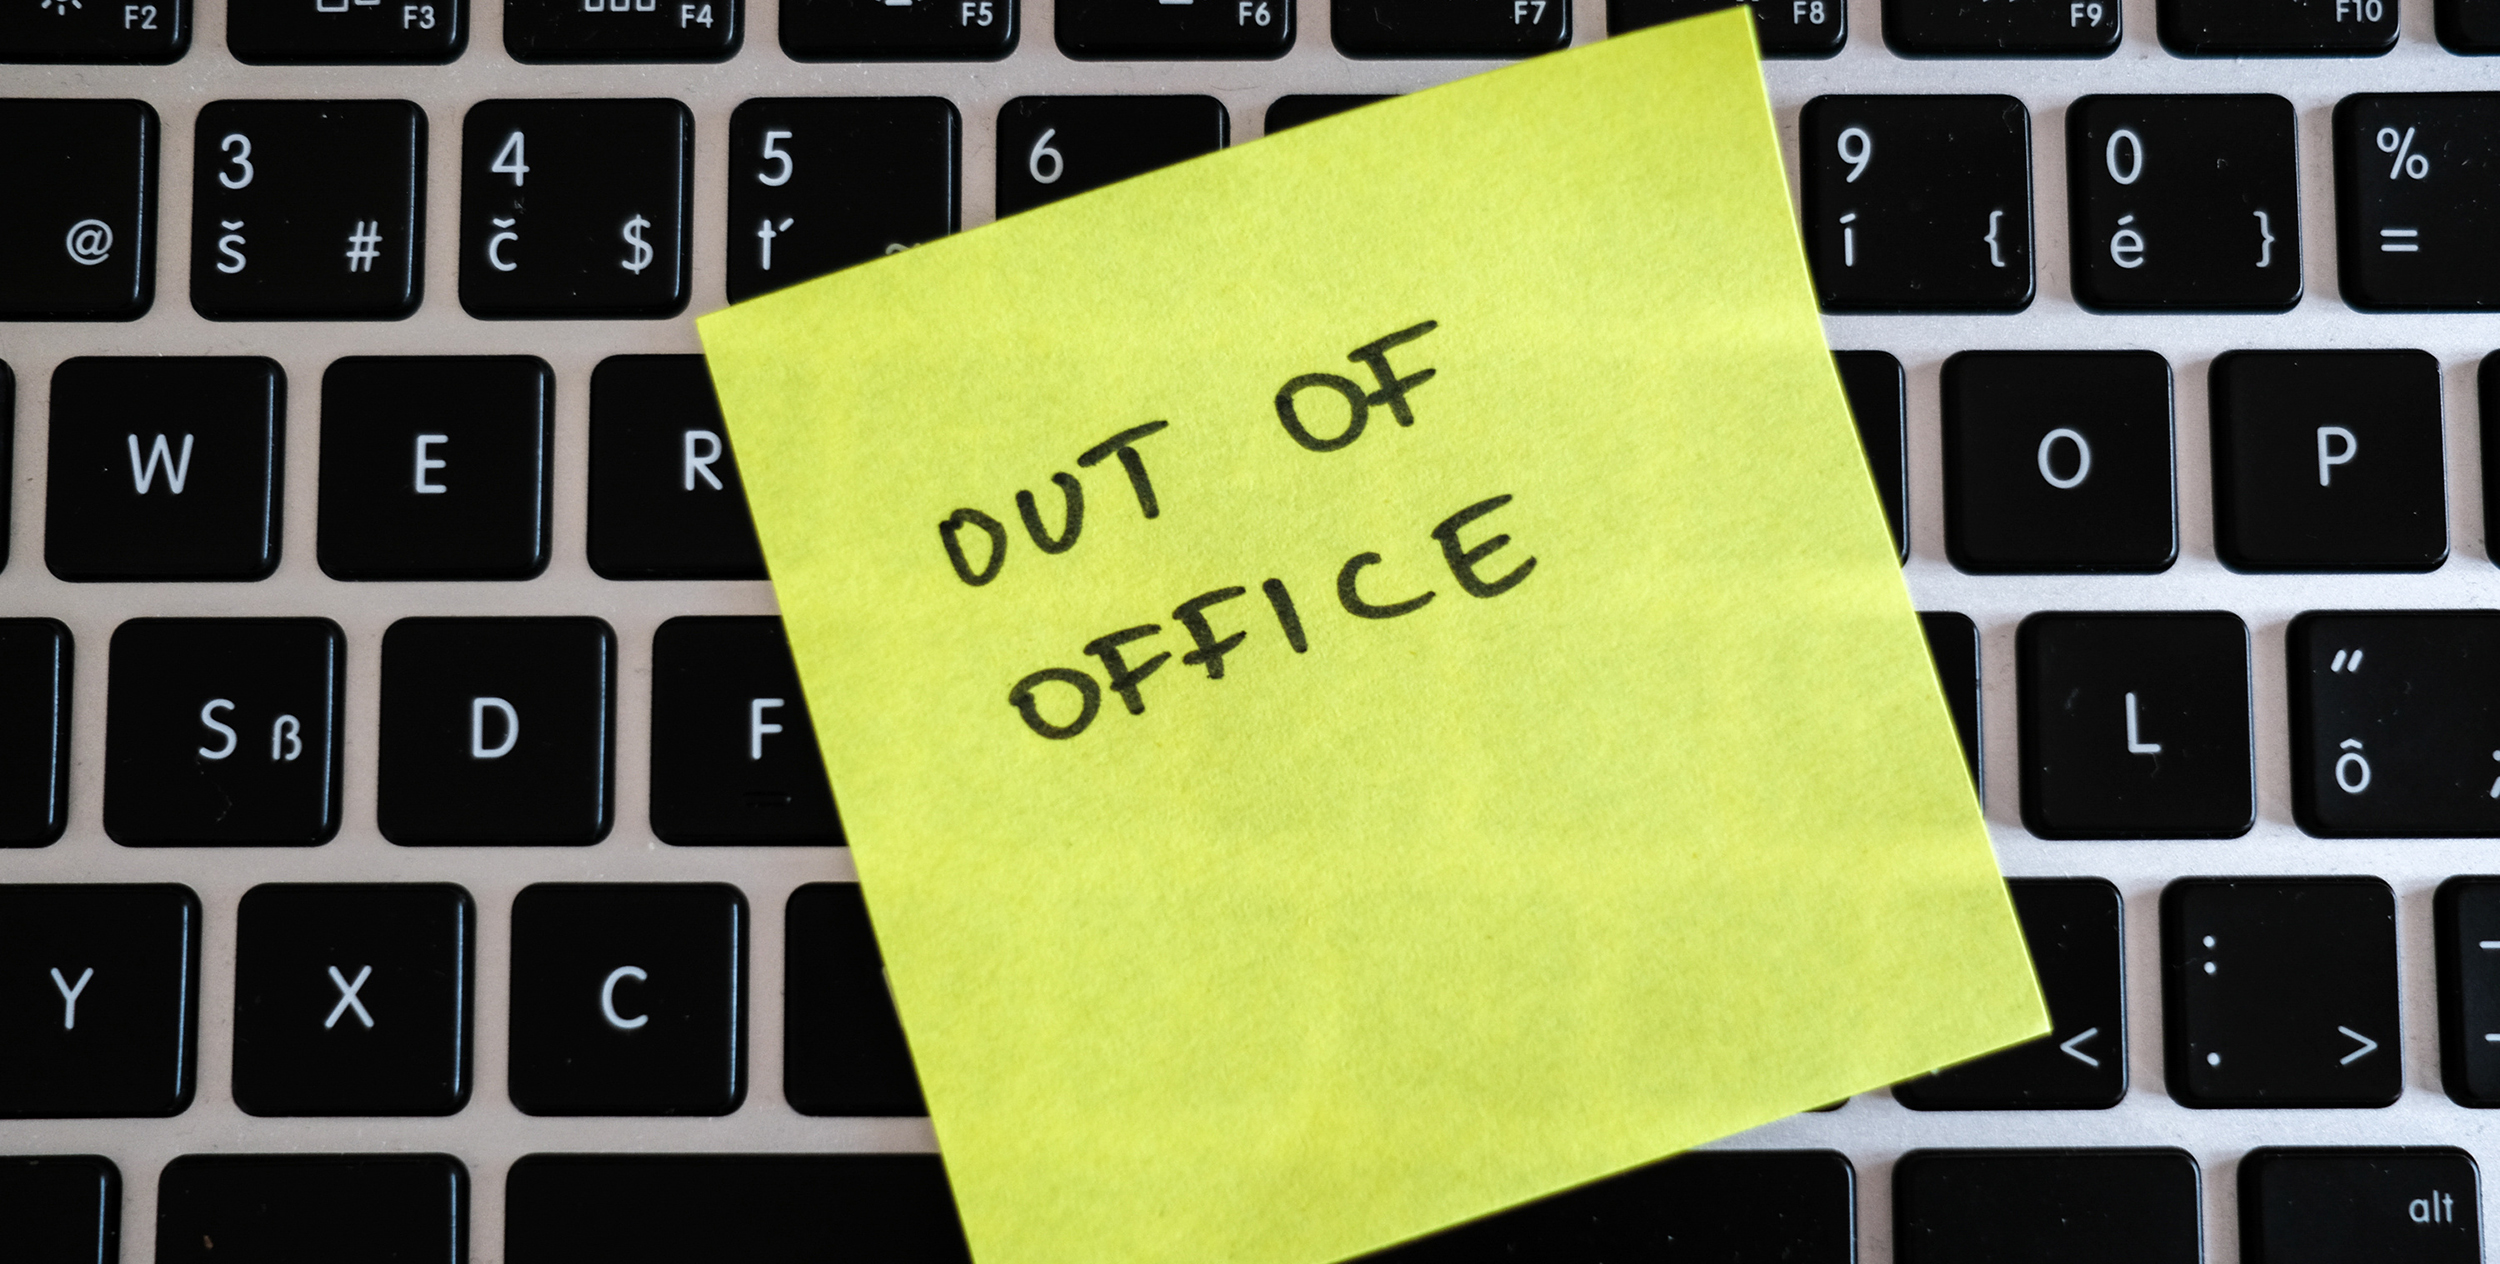 Vacation needed. Holiday office message on laptop. Out of office